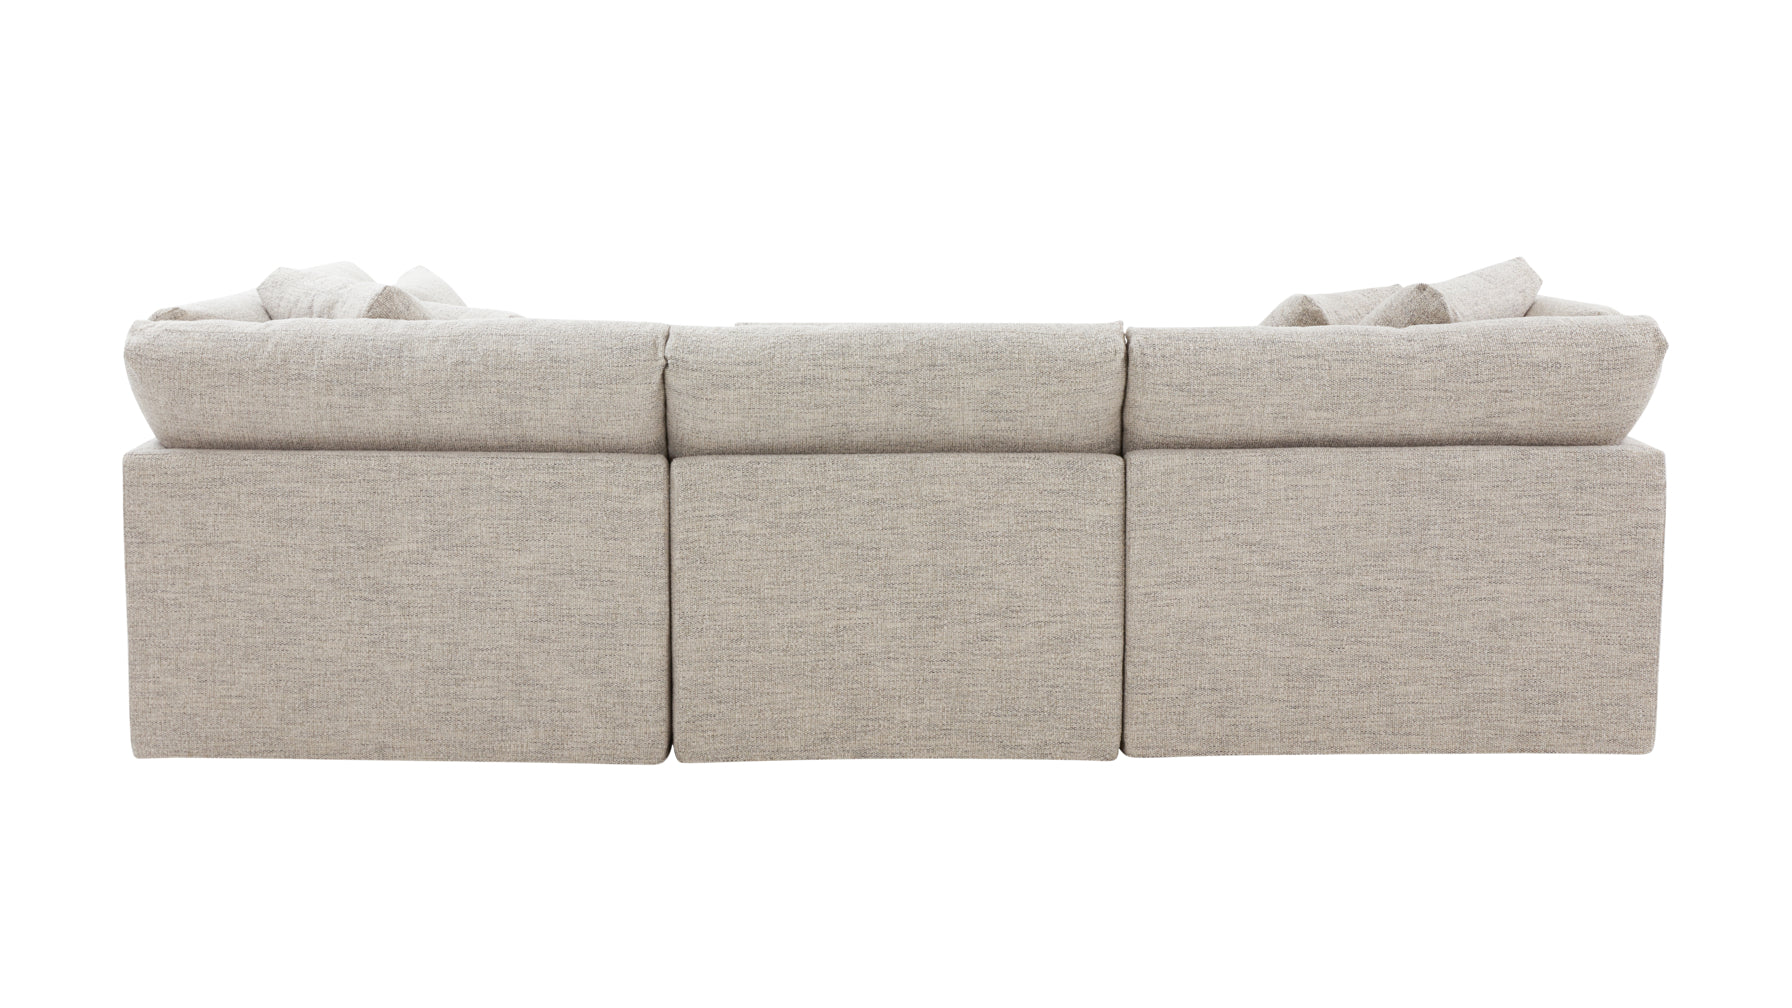 Get Together™ 5-Piece Modular Sectional, Large, Oatmeal - Image 6